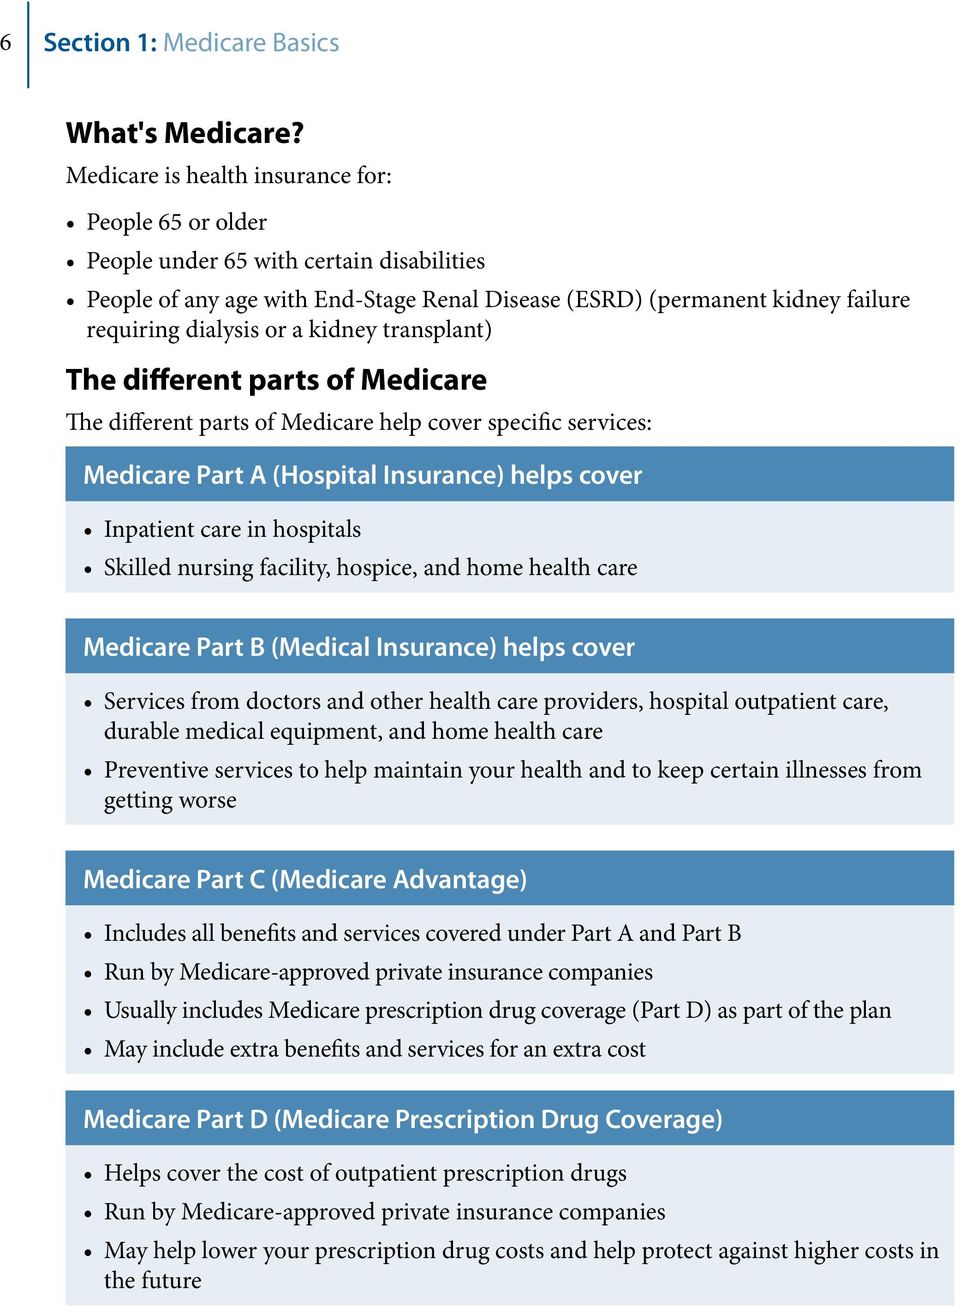 kidney transplant) The different parts of Medicare The different parts of Medicare help cover specific services: Medicare Part A (Hospital Insurance) helps cover Inpatient care in hospitals Skilled